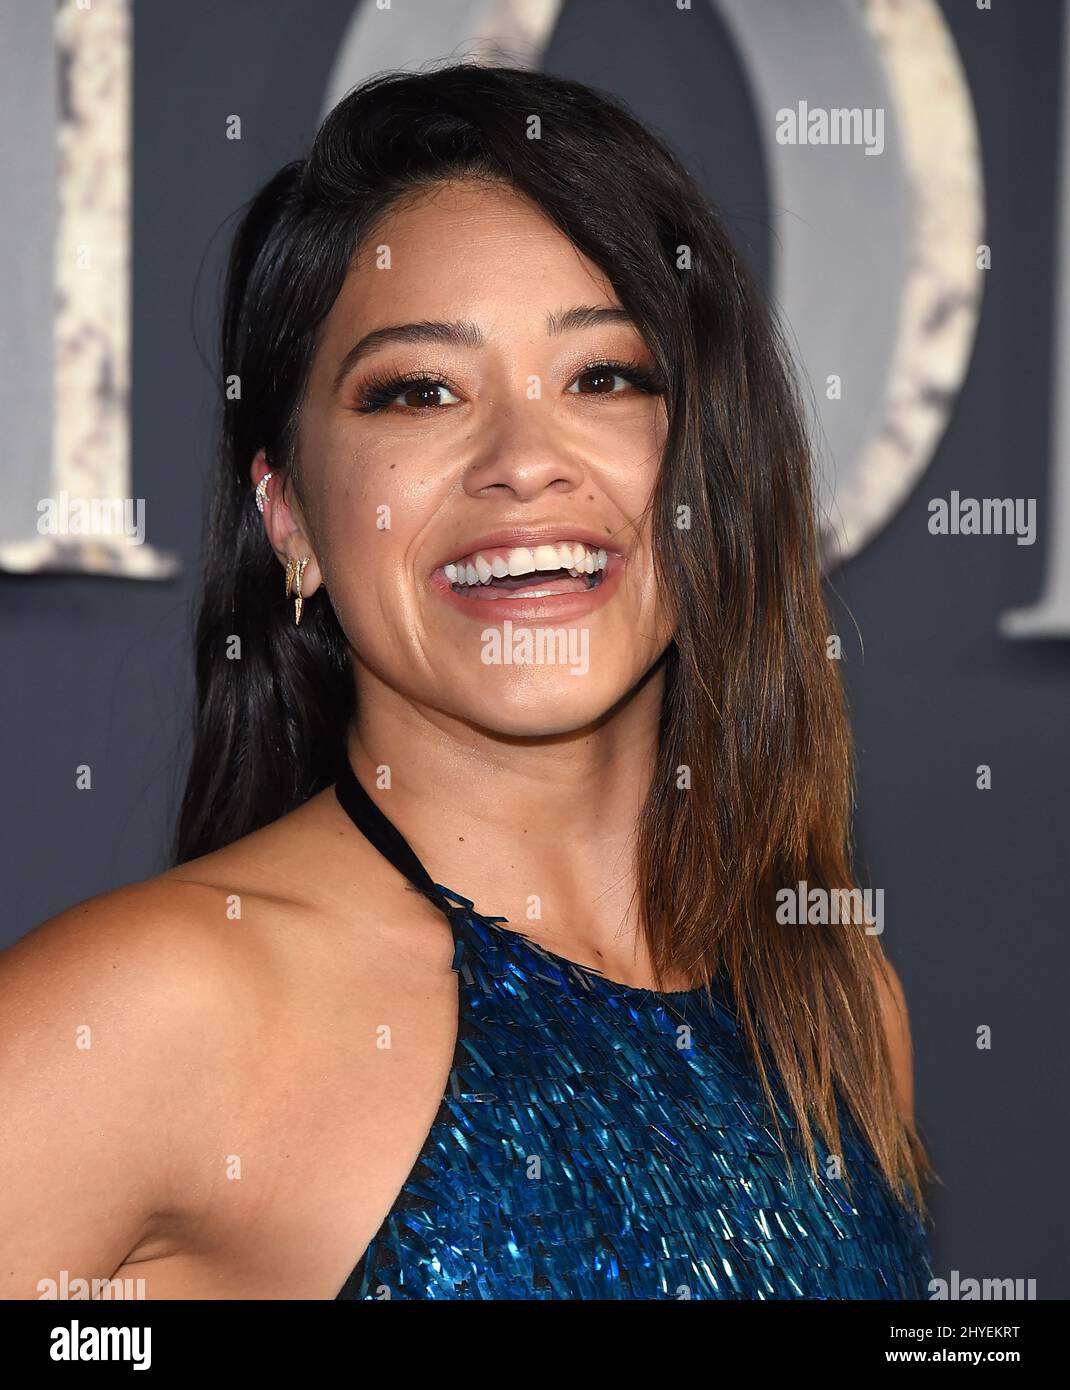 Gina Rodriguez arriving for the Los Angeles premiere of 'Annihilation' held at the Regency Village Theatre on February 13, 2018 in Westwood, Los Angeles Stock Photo